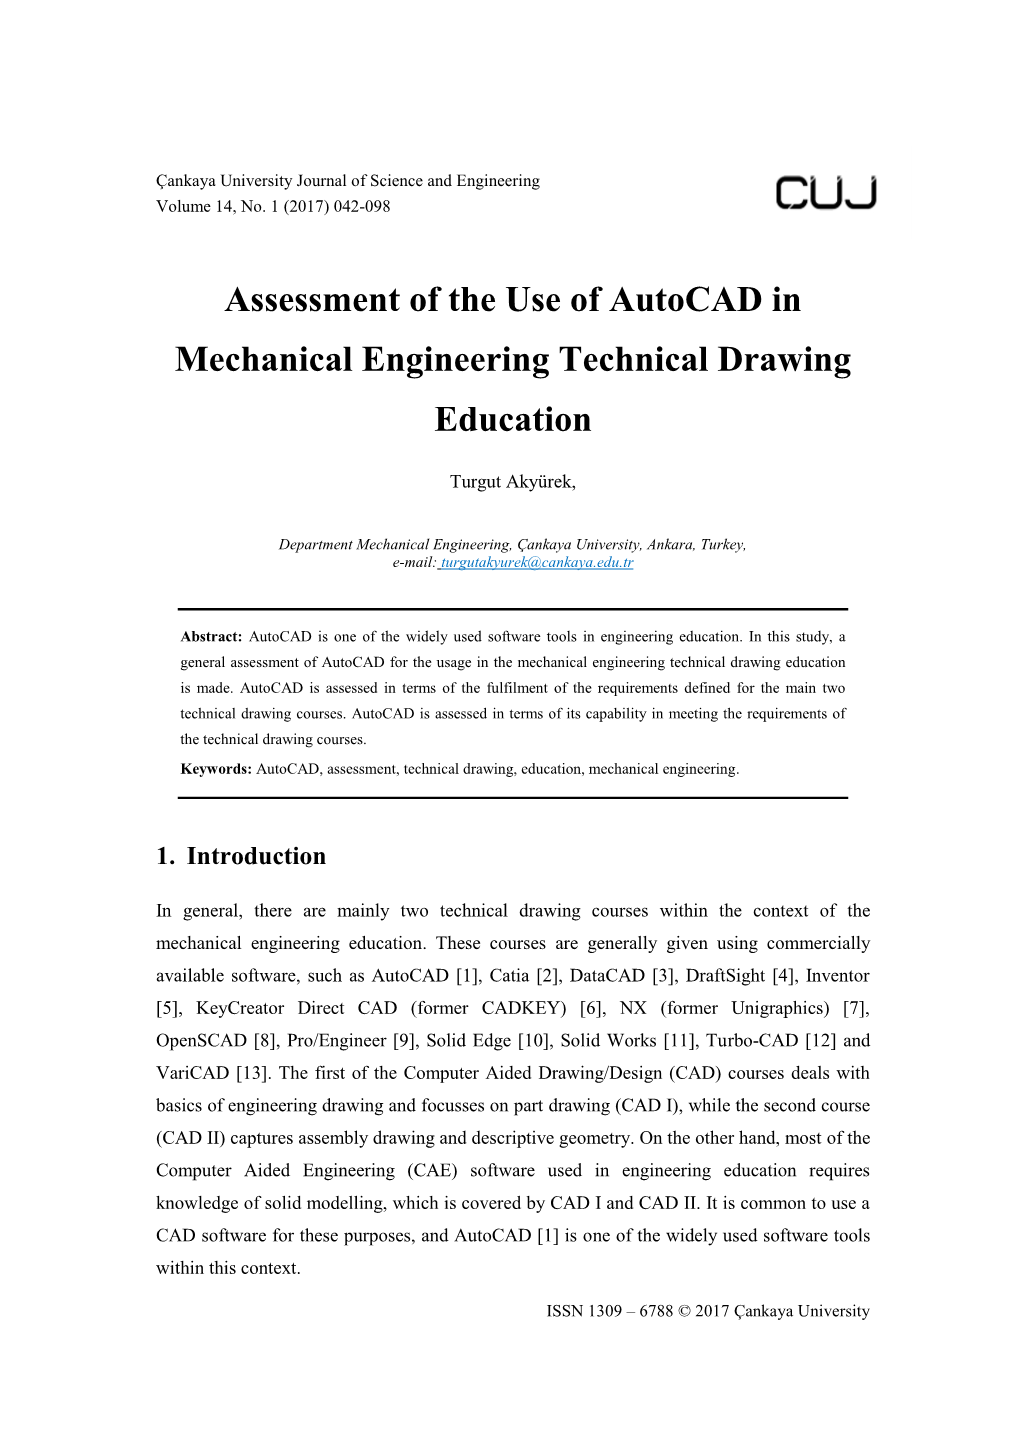 Assessment of the Use of Autocad in Mechanical Engineering Technical Drawing Education